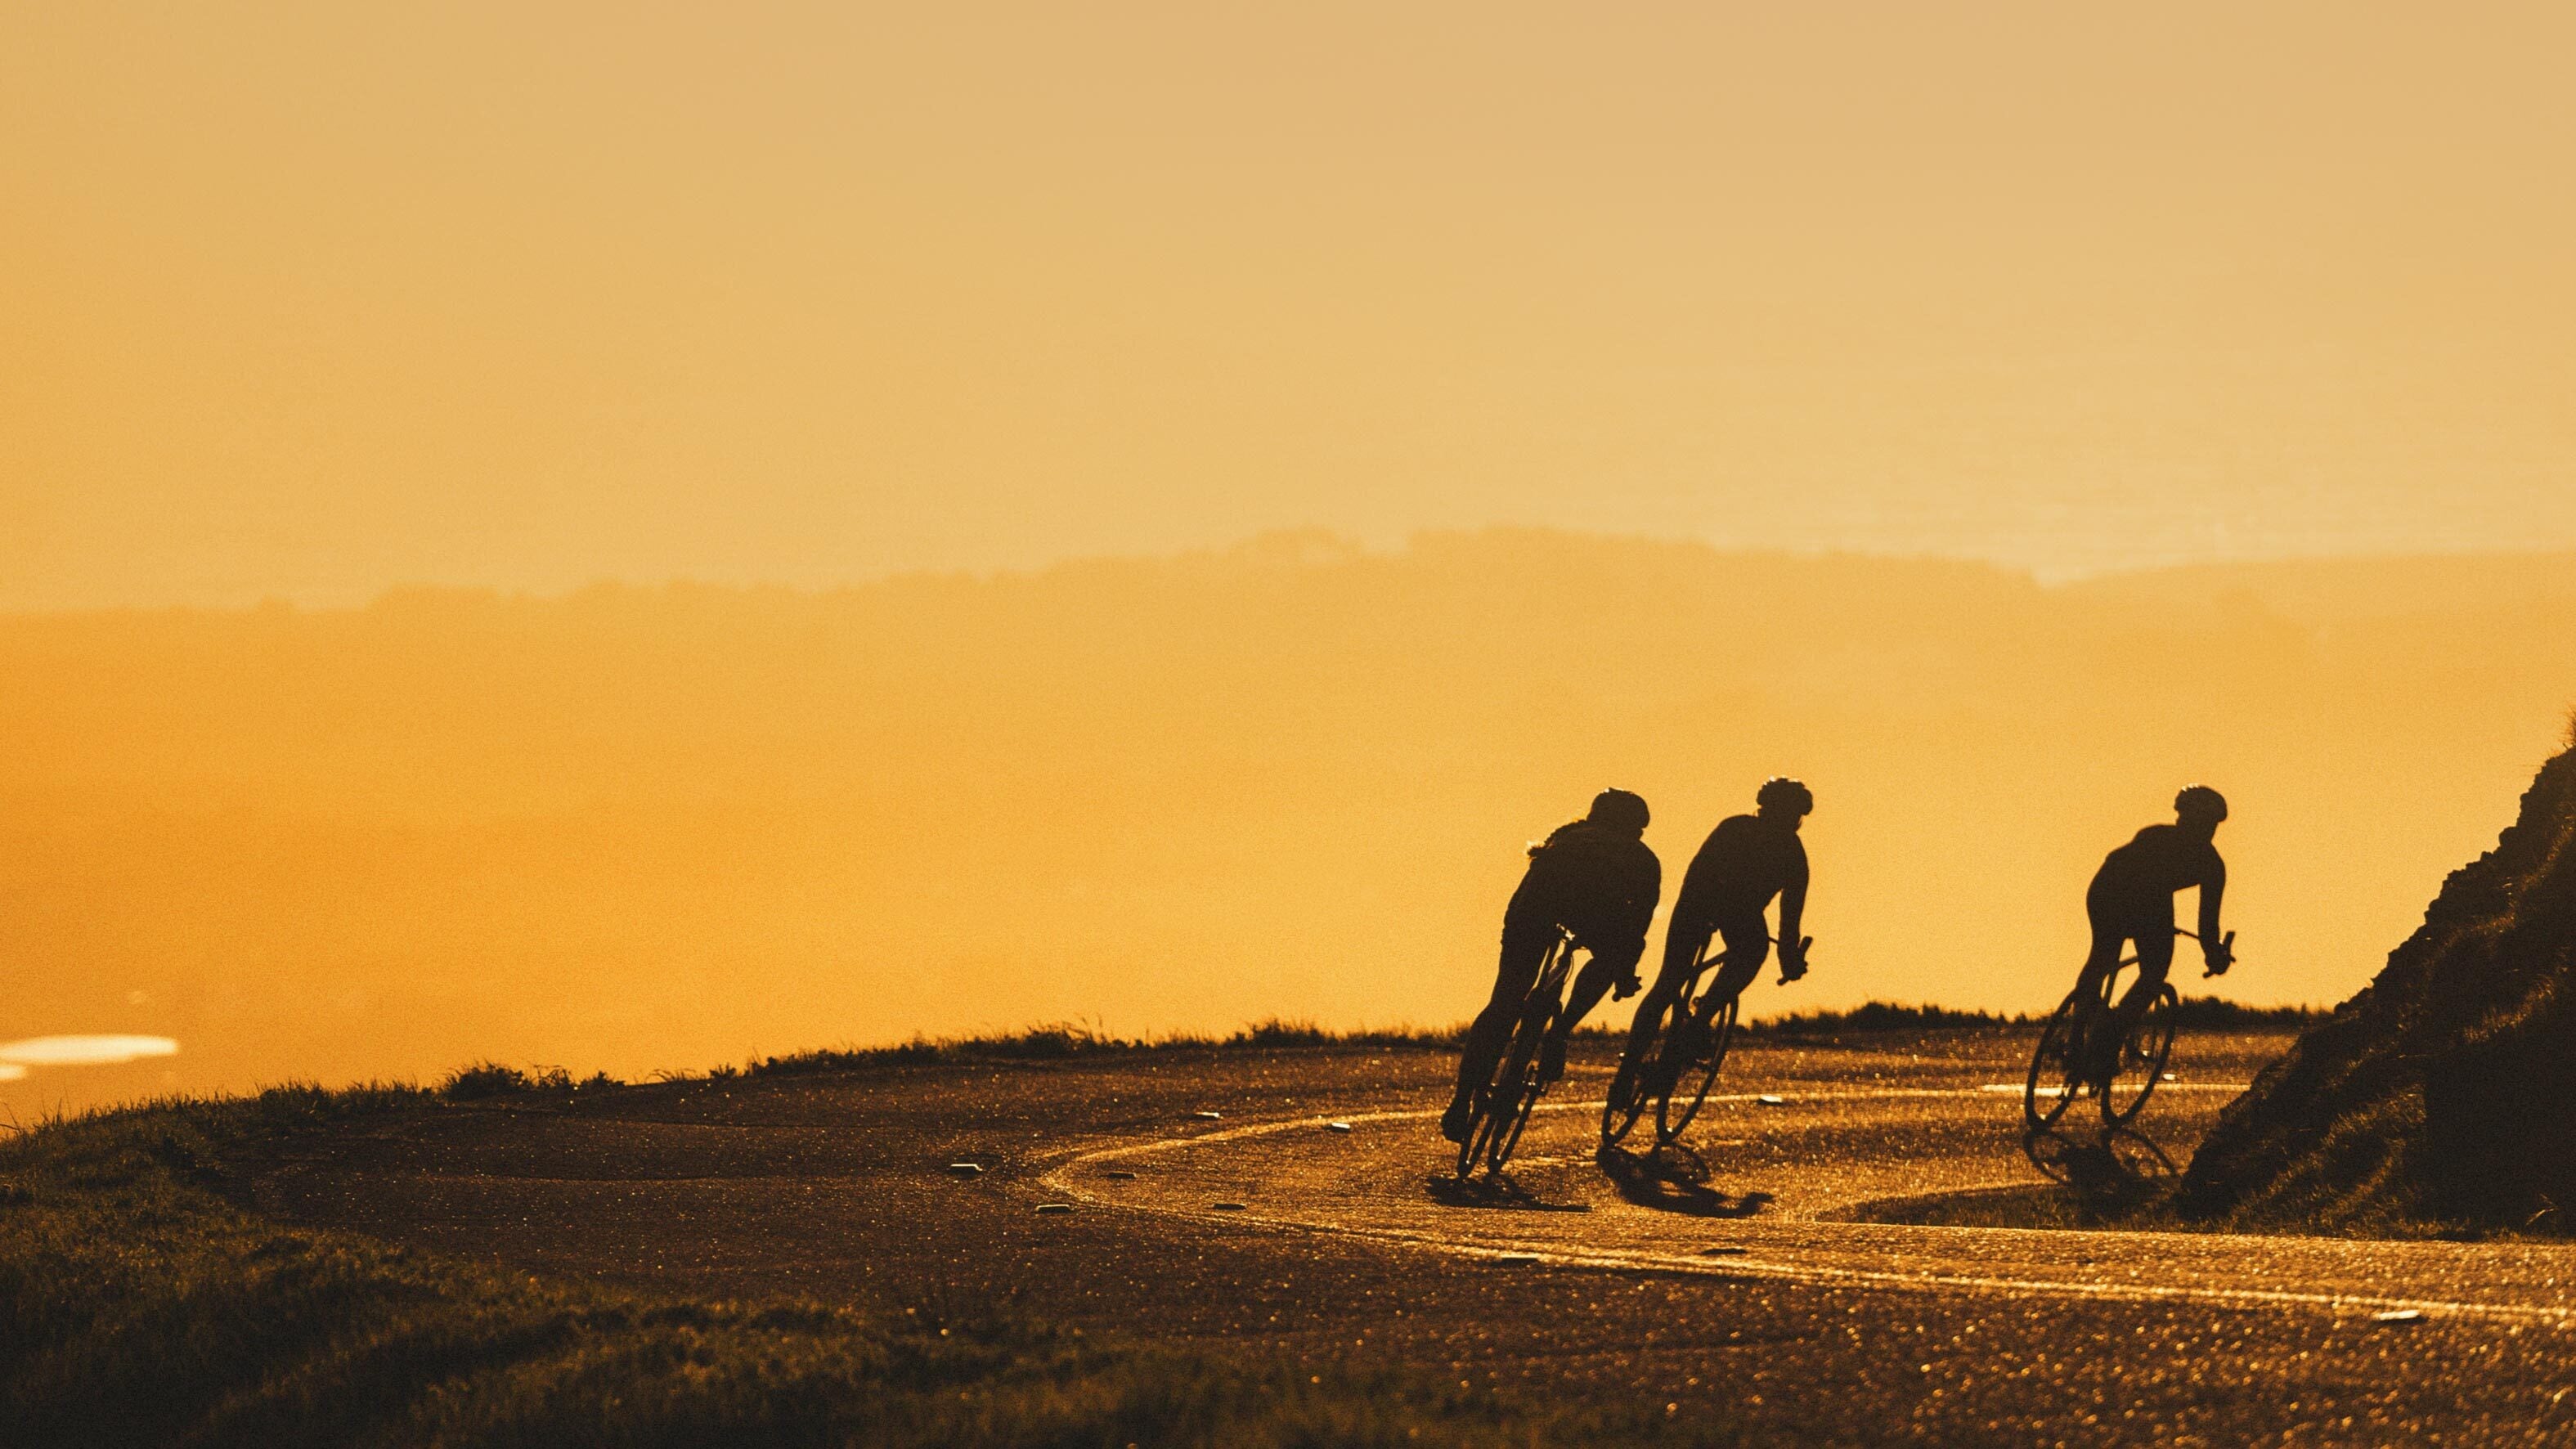 A group of cyclists descending a road in a beautiful sunset @ bici